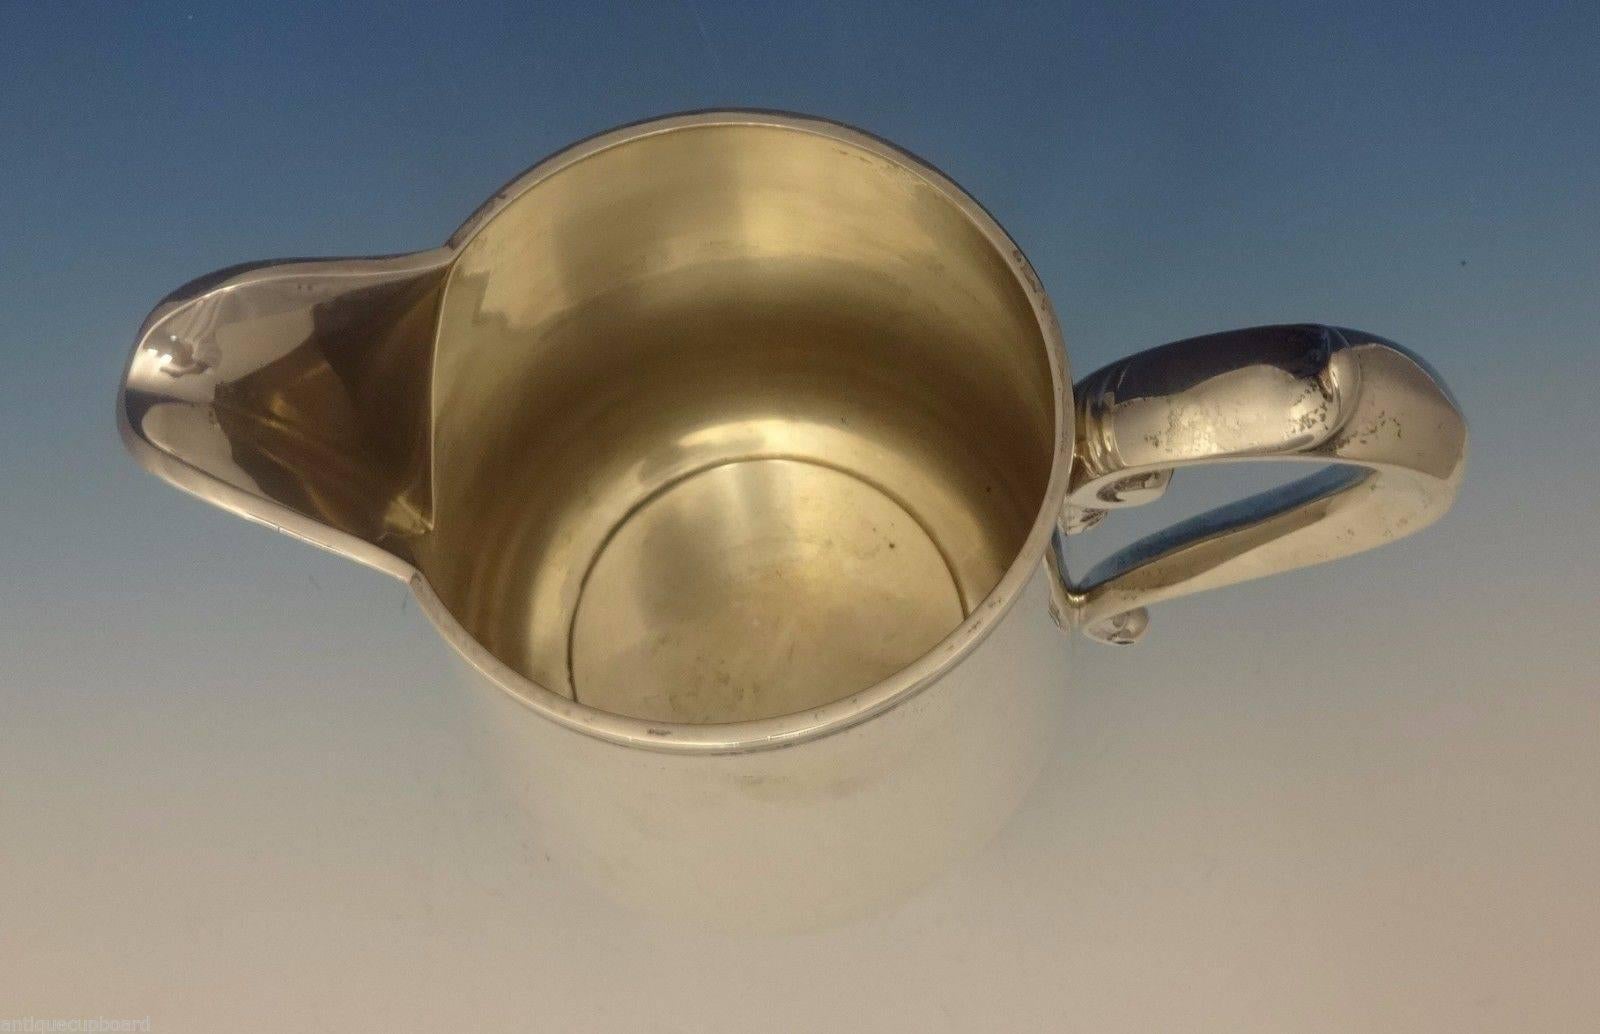 Richard Dimes.

This fabulous sterling silver water pitcher was made by Richard Dimes. The piece is a reproduction of the style of the mid-1700s and is engraved 